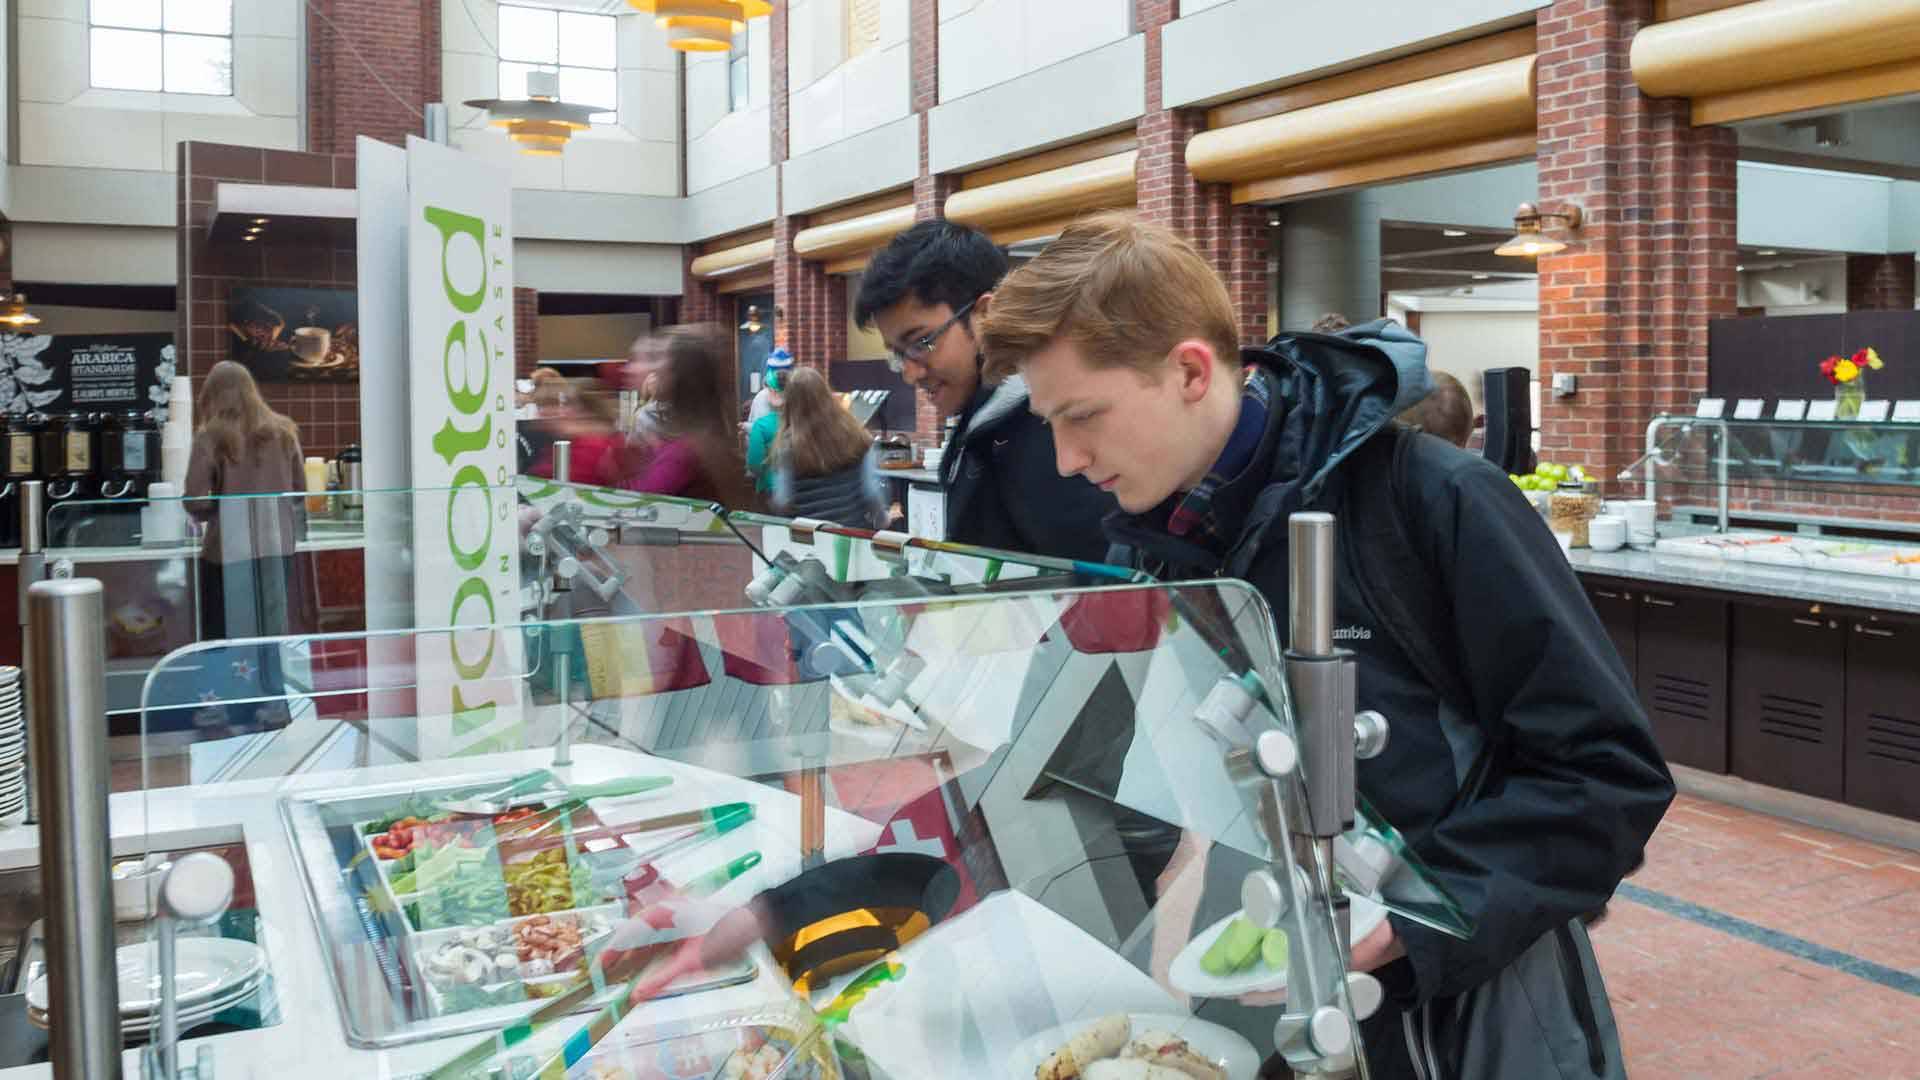 Students at the Rooted station in Frank Dining Hall